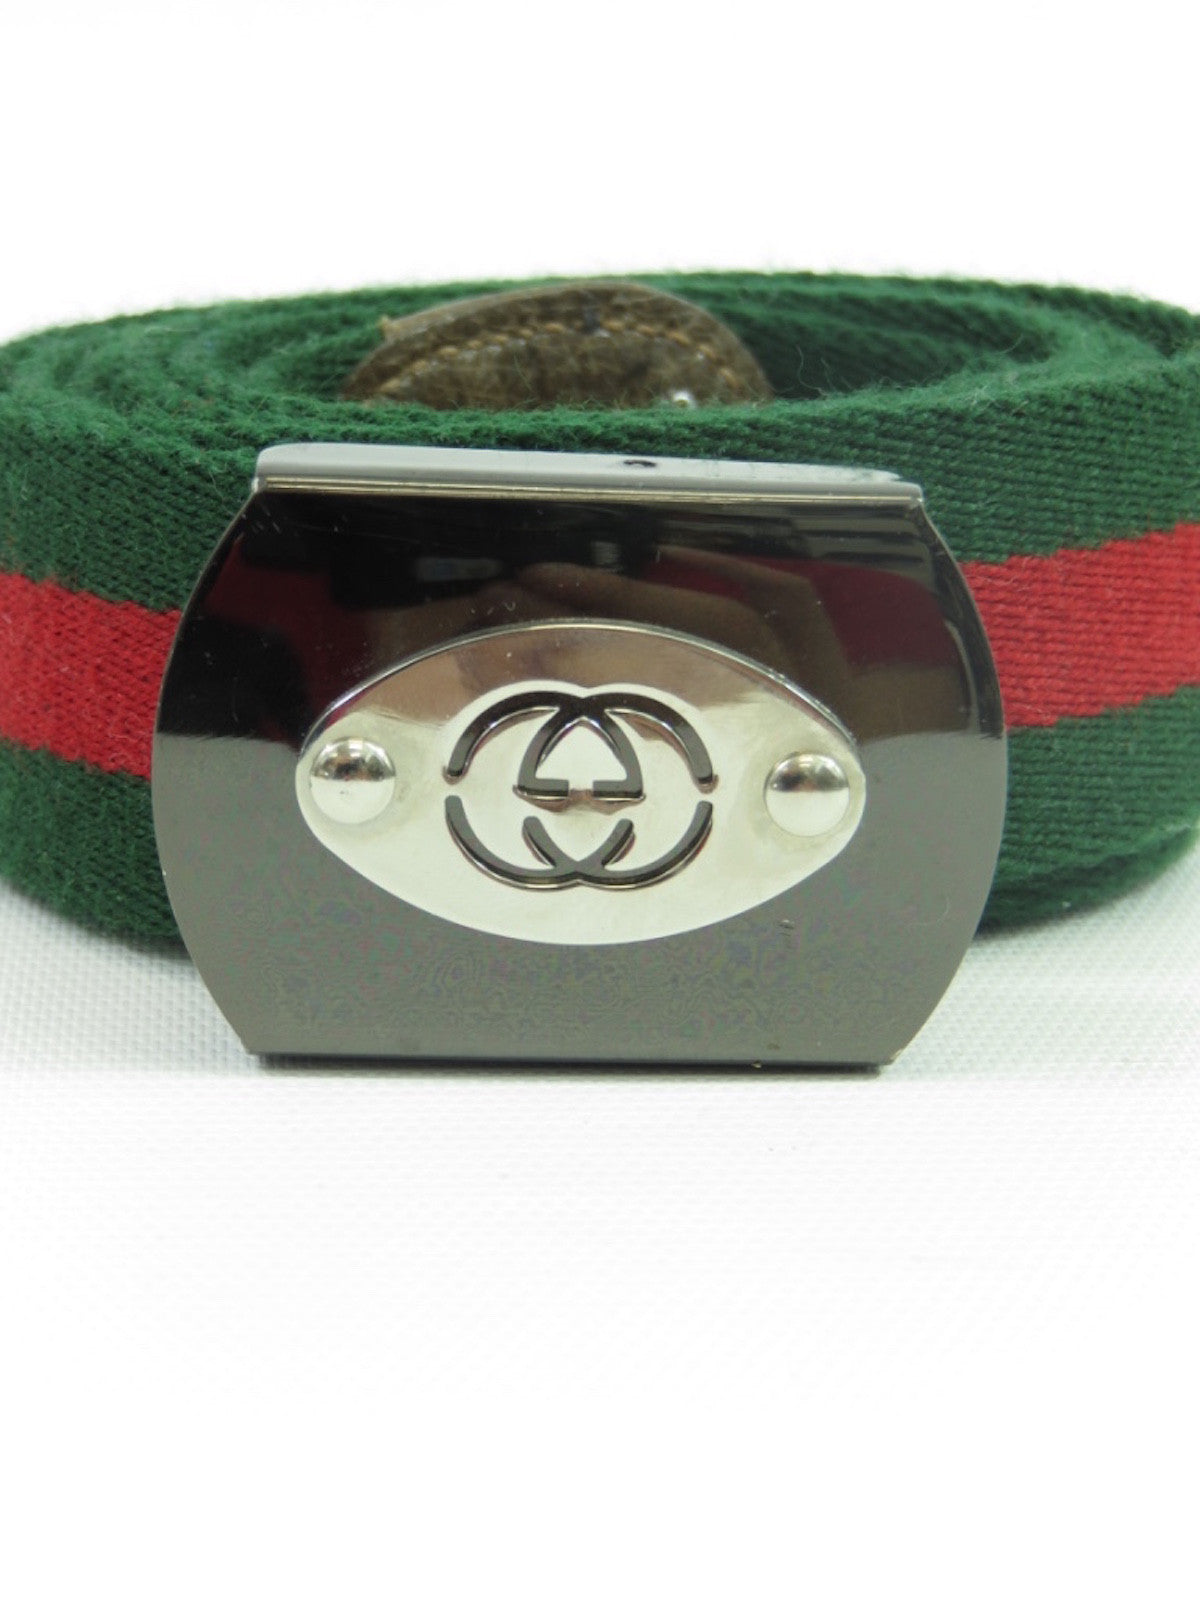 GUCCI Men Iconic Green Red Canvas Silver GG Logo Buckle Belt 46